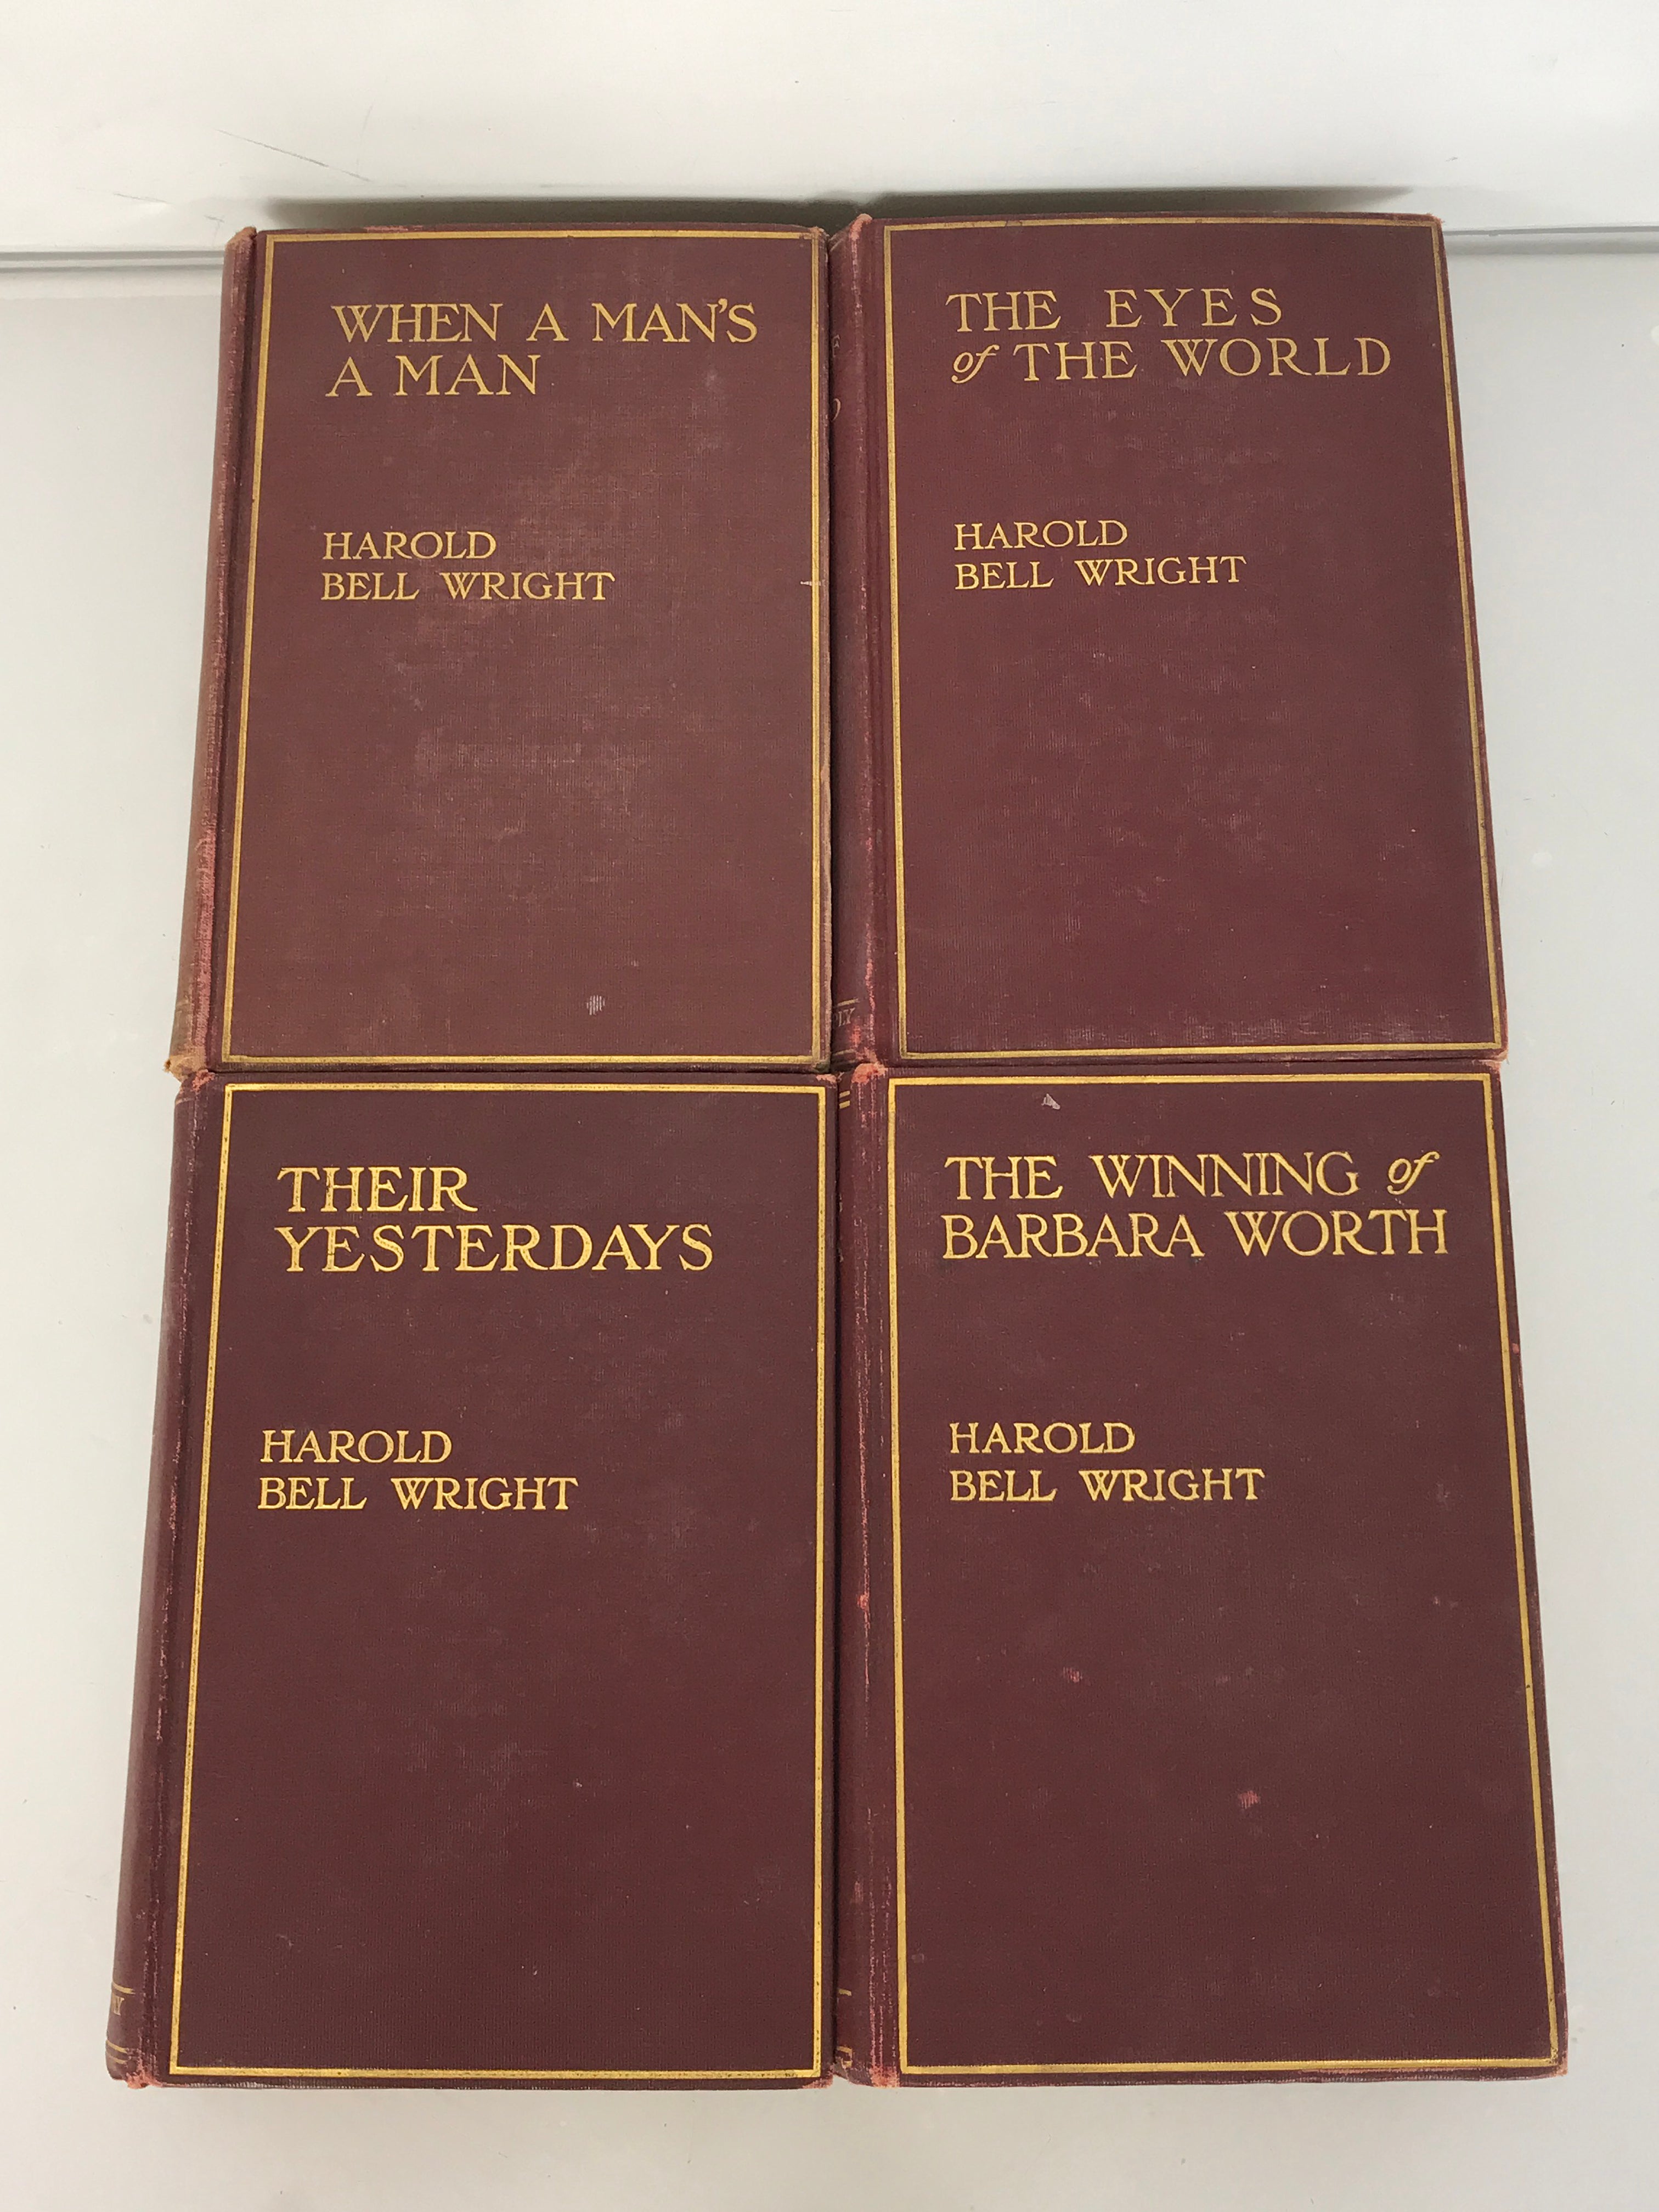 Lot of 4 Antique H.B. Wright Books: When A Man's a Man, The Eyes of the World, The Winning of Barbara Worth, Their Yesterdays 1911-1916 HC